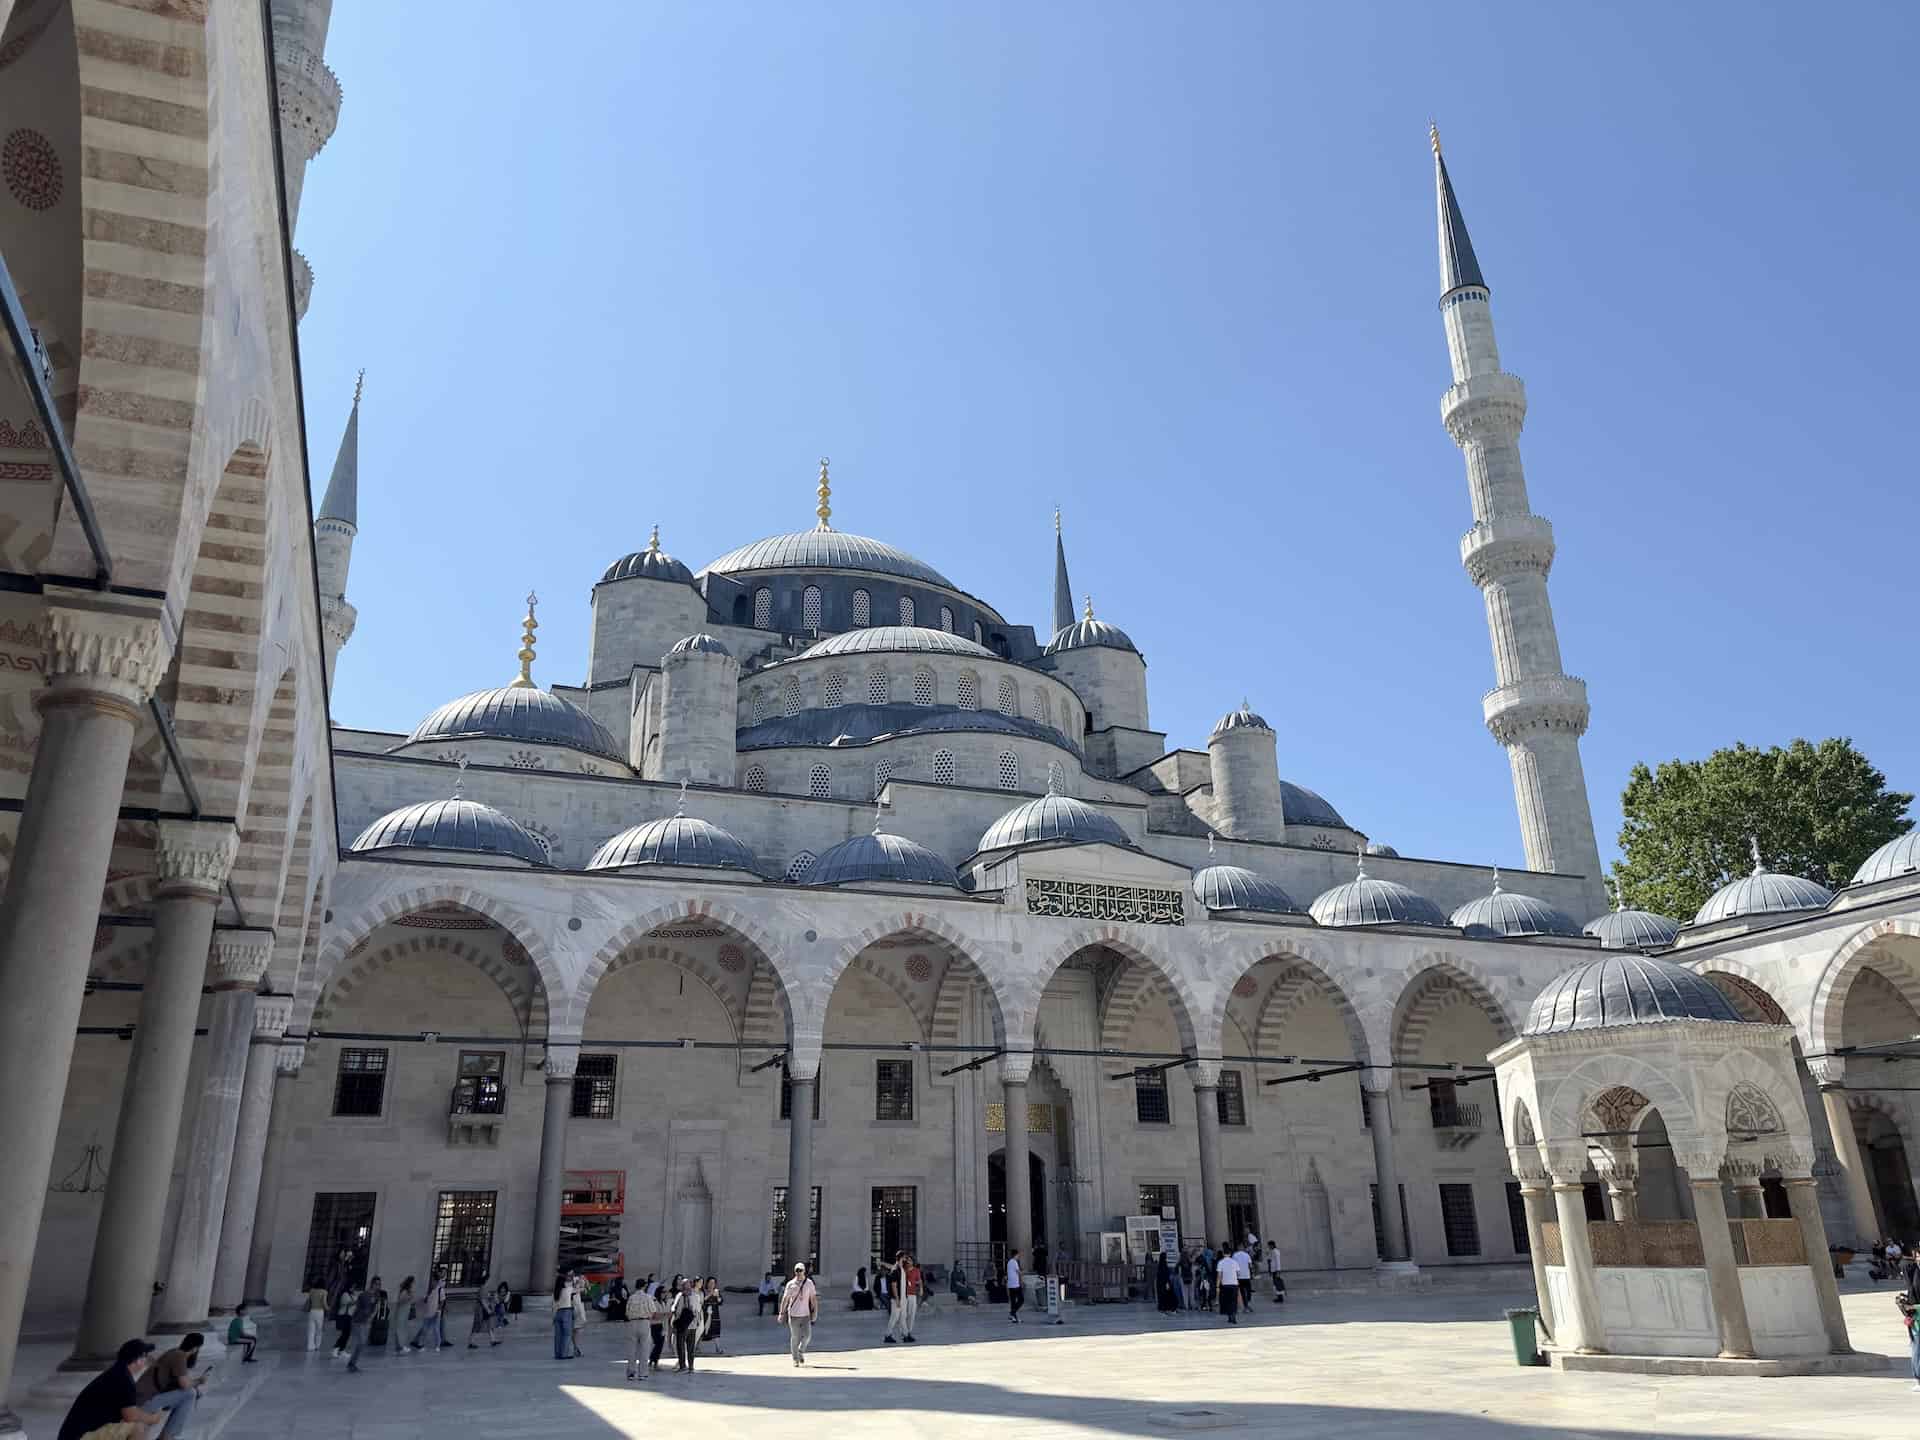 Courtyard of the Blue Mosque in Istanbul, Turkey